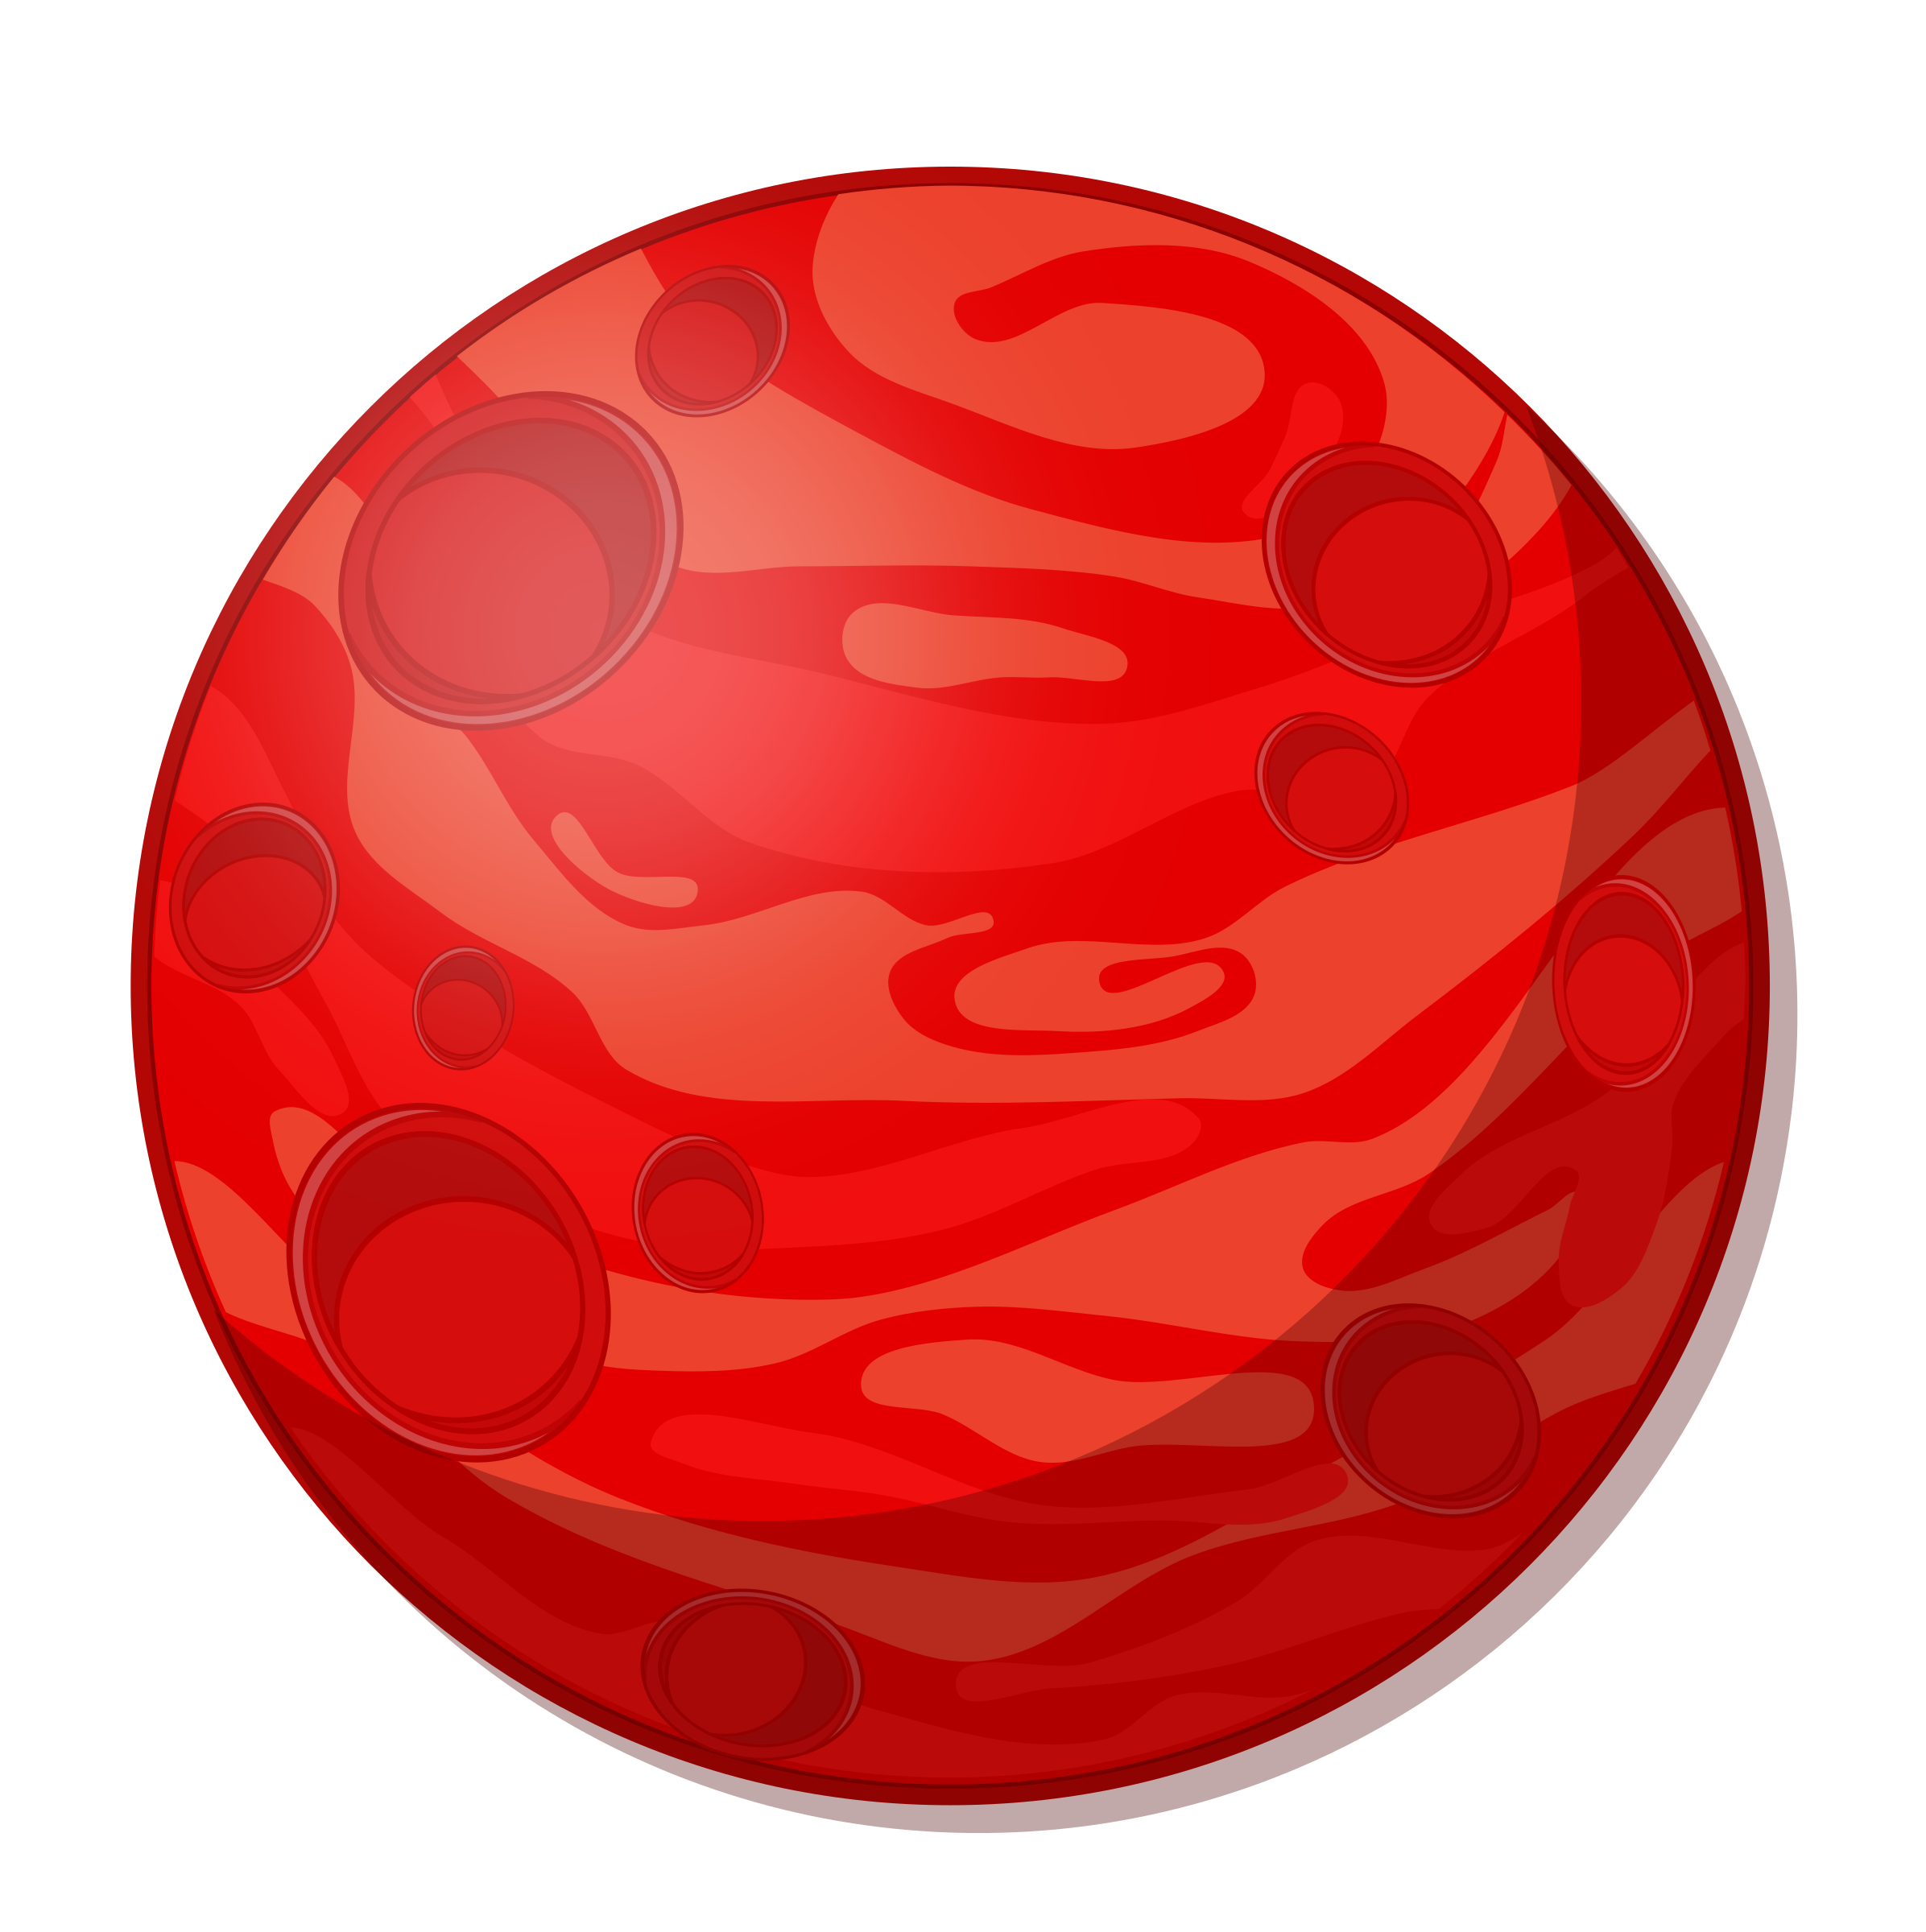 planets clipart red planet